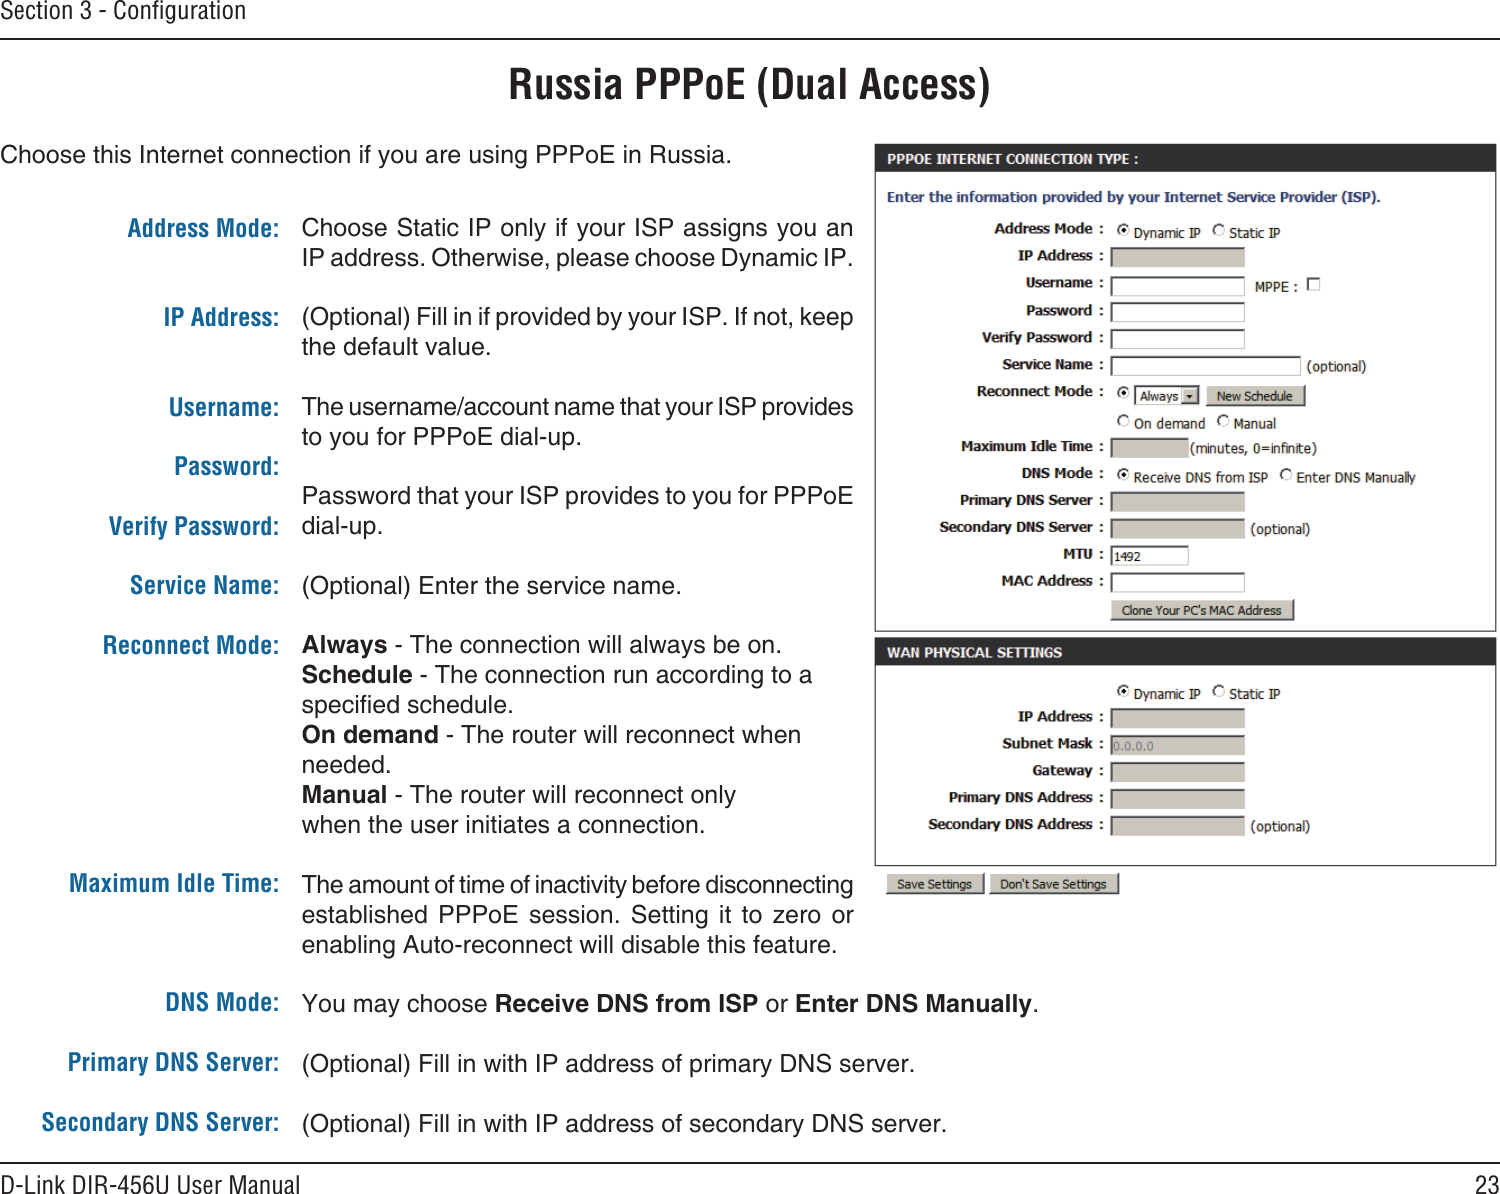 23D-Link DIR-456U User ManualSection 3 - ConﬁgurationRussia PPPoE (Dual Access)Choose this Internet connection if you are using PPPoE in Russia.Choose Static IP only if your ISP assigns you an IP address. Otherwise, please choose Dynamic IP.(Optional) Fill in if provided by your ISP. If not, keep the default value.The username/account name that your ISP provides to you for PPPoE dial-up.Password that your ISP provides to you for PPPoE dial-up.(Optional) Enter the service name.Always - The connection will always be on.Schedule - The connection run according to a specied schedule. On demand - The router will reconnect when needed. Manual - The router will reconnect only when the user initiates a connection.The amount of time of inactivity before disconnecting established  PPPoE  session.  Setting  it  to  zero  or enabling Auto-reconnect will disable this feature.You may choose Receive DNS from ISP or Enter DNS Manually.(Optional) Fill in with IP address of primary DNS server.(Optional) Fill in with IP address of secondary DNS server.Address Mode: IP Address: Username:Password:Verify Password:Service Name:Reconnect Mode:  Maximum Idle Time:DNS Mode:Primary DNS Server:Secondary DNS Server: